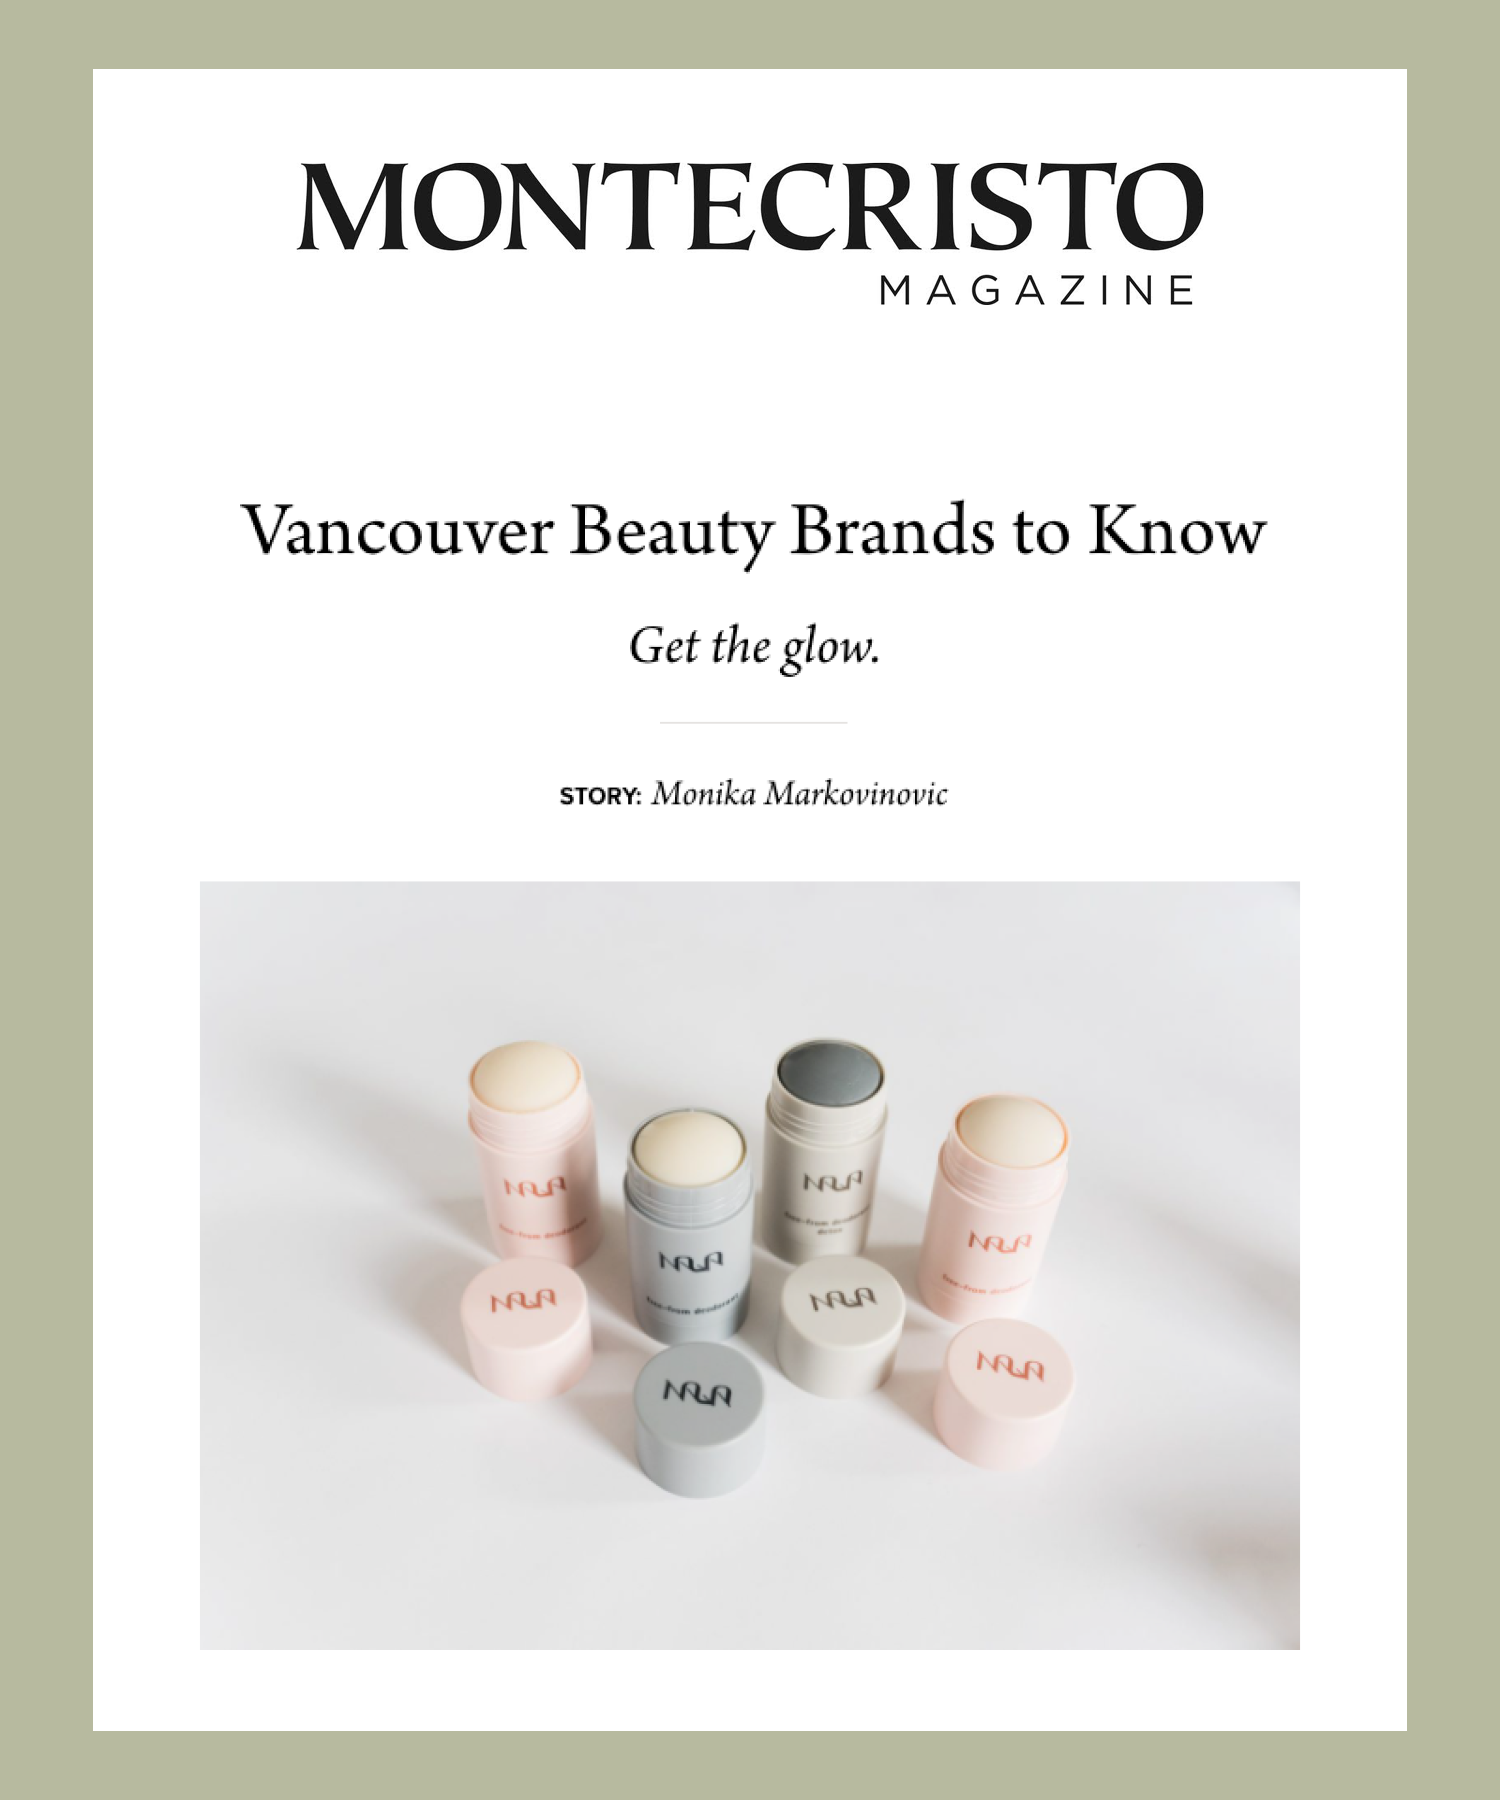 Monte Cristo: Vancouver Beauty Brands to Know